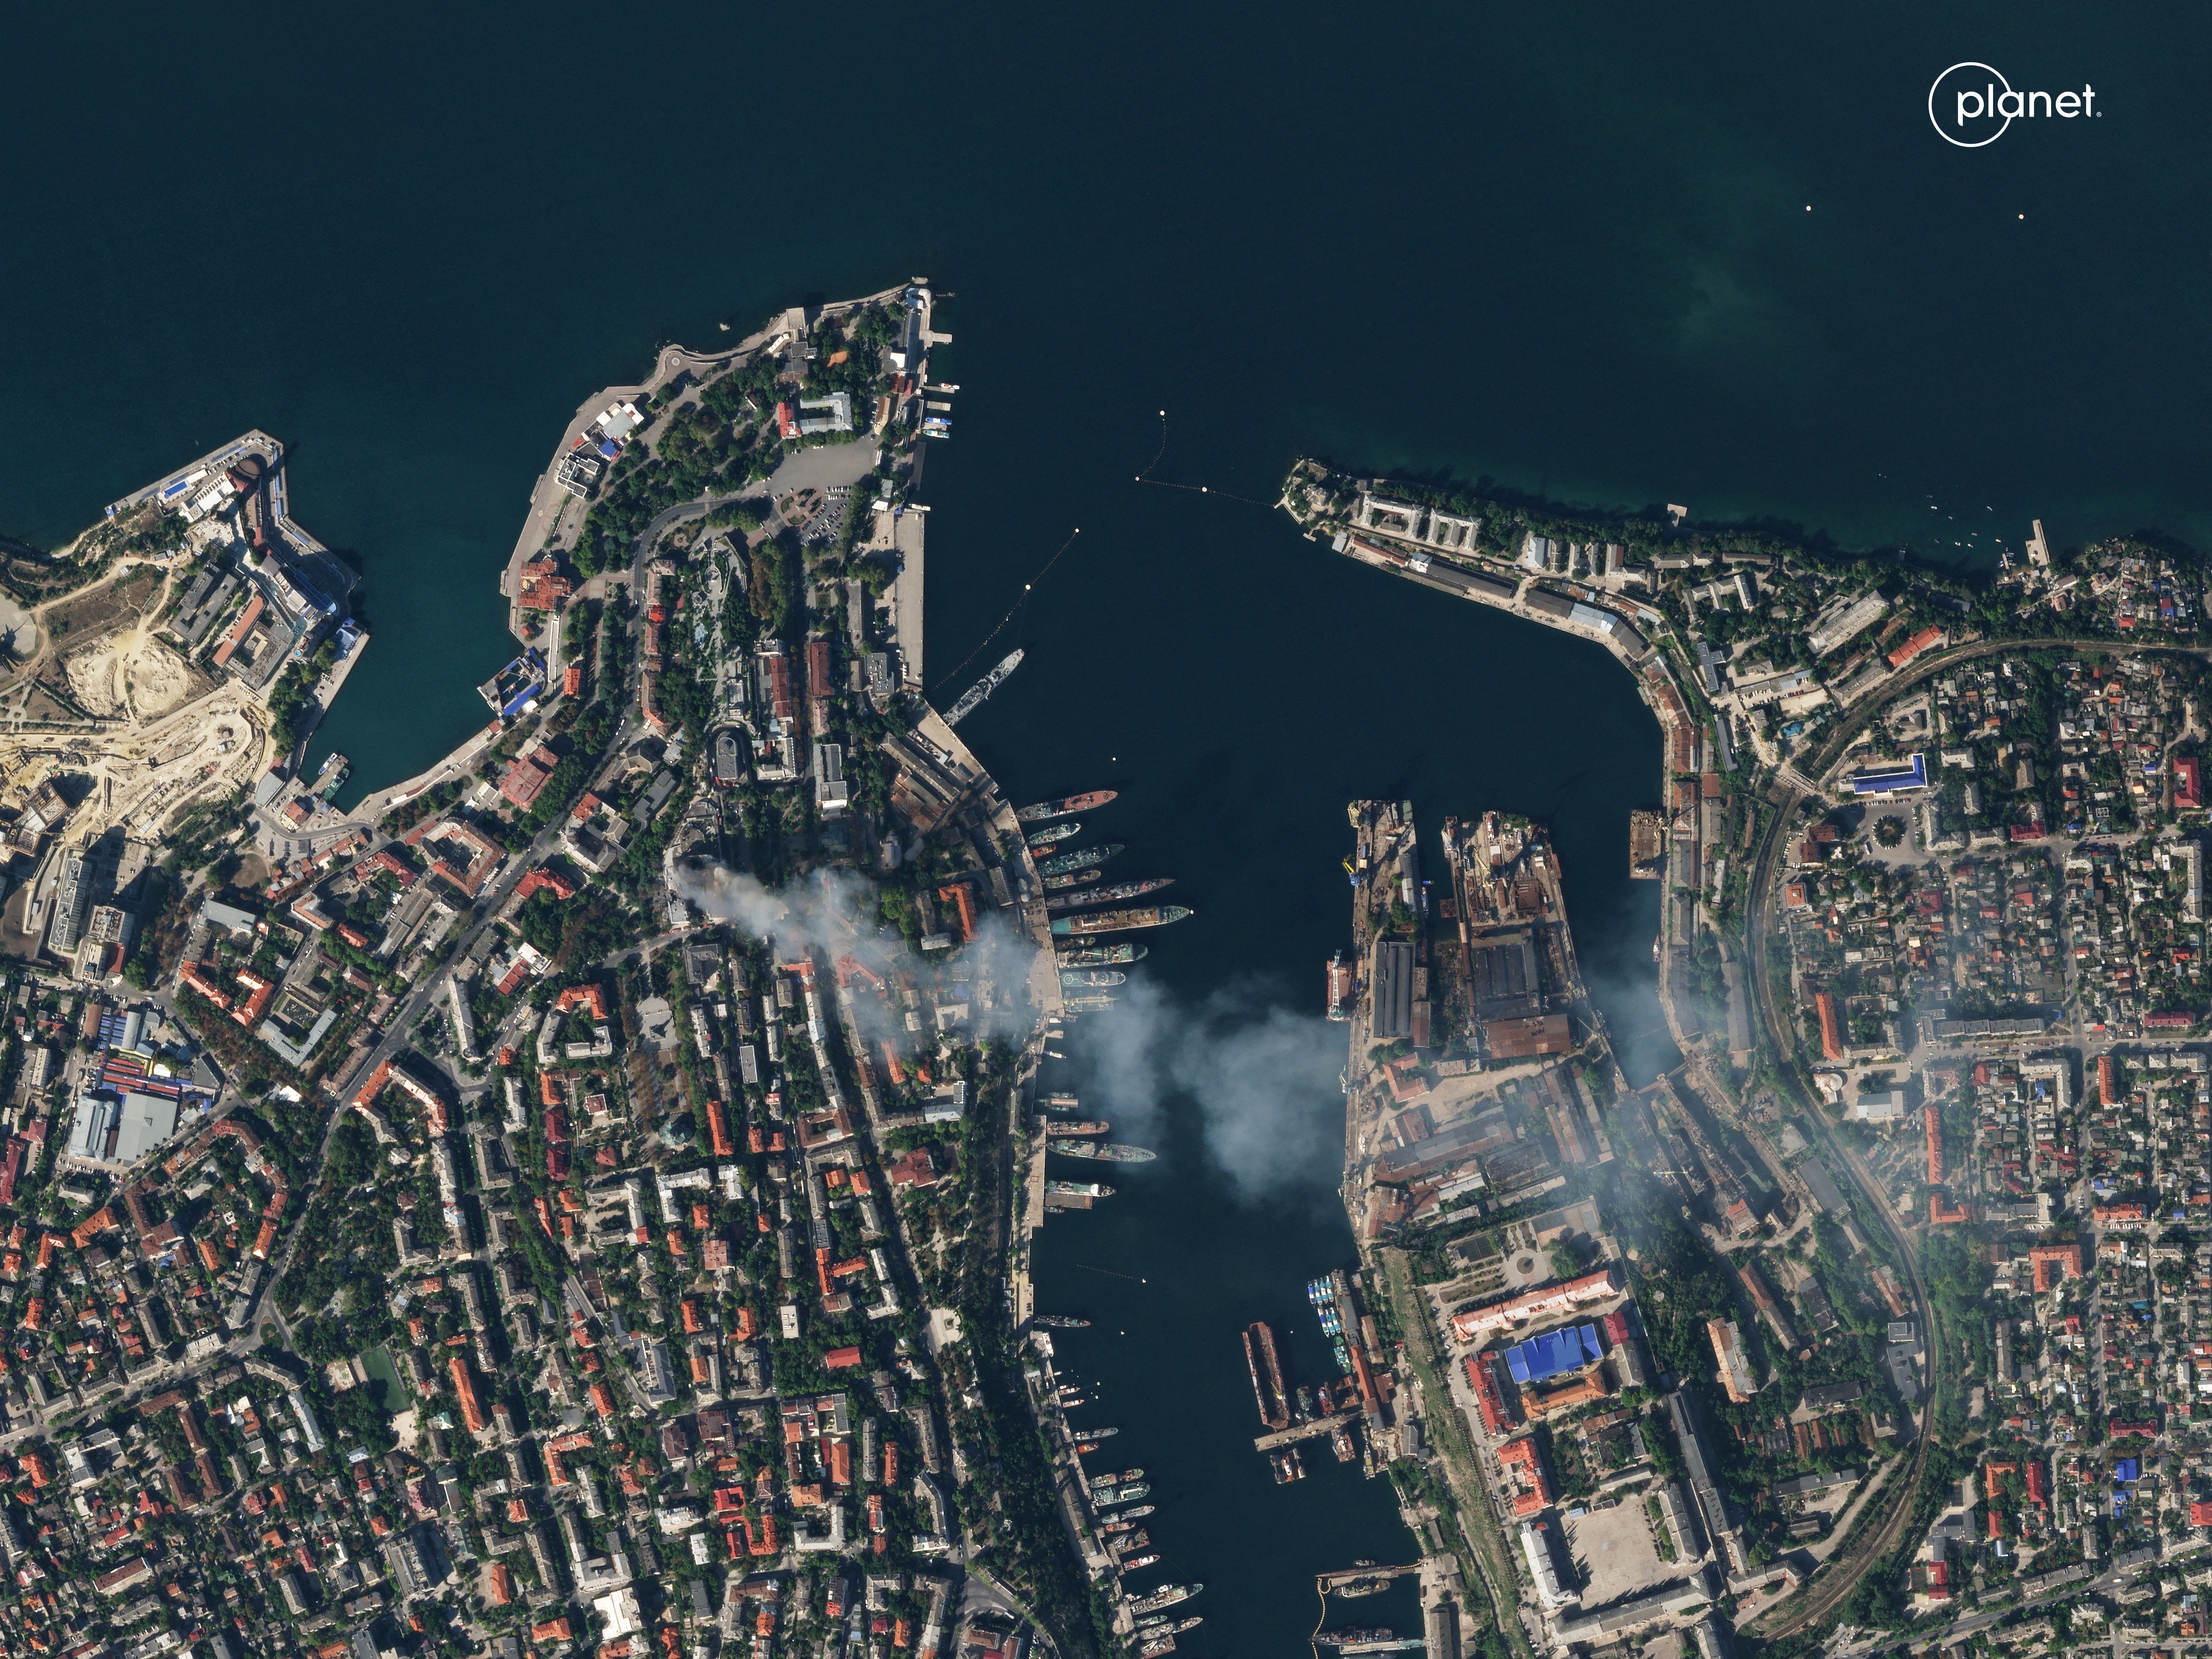 A satellite image shows smoke billowing from the Russian Black Sea navy HQ after a missile strike in Sevastopol